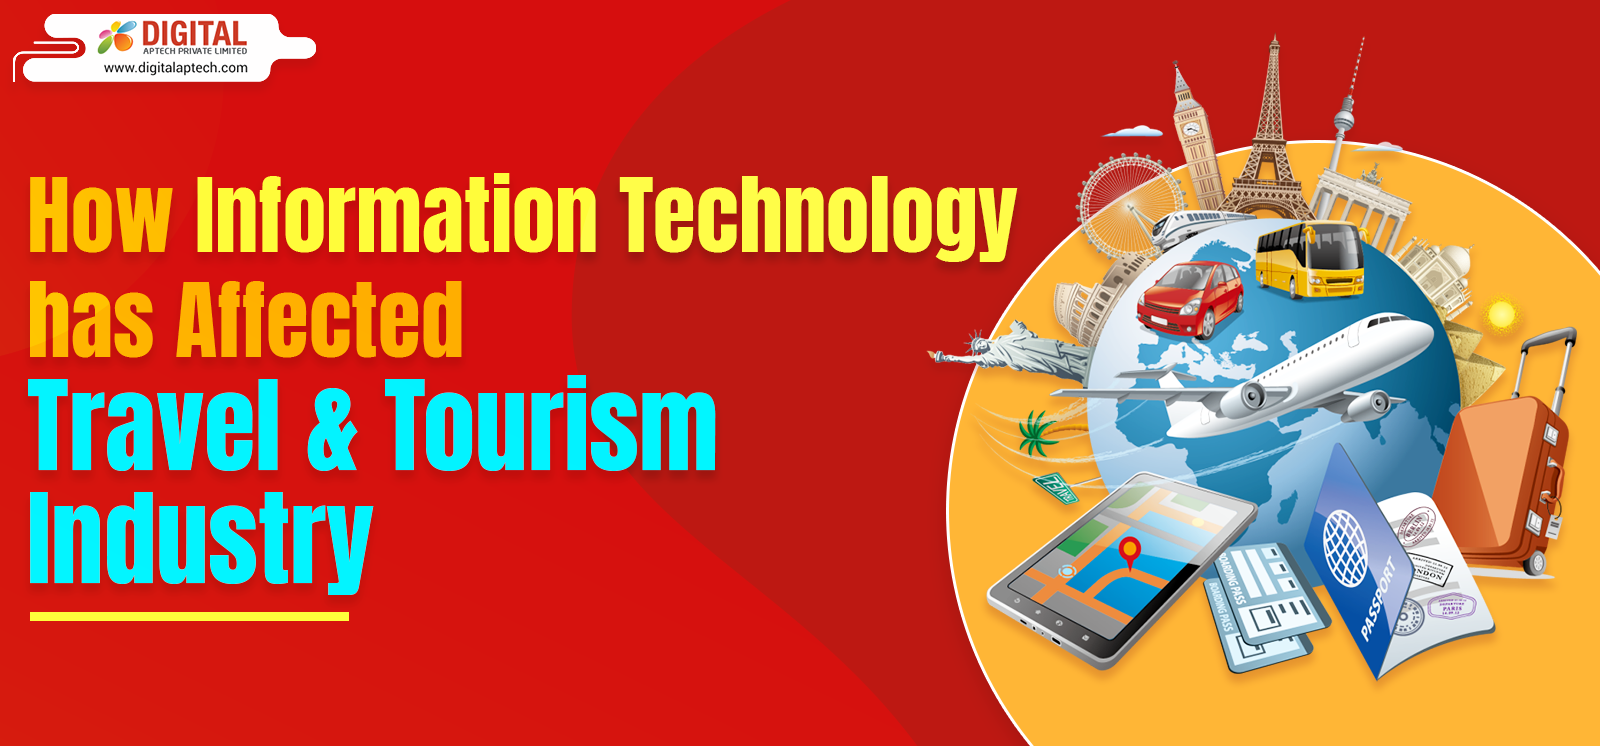 importance of ict in tourism industry